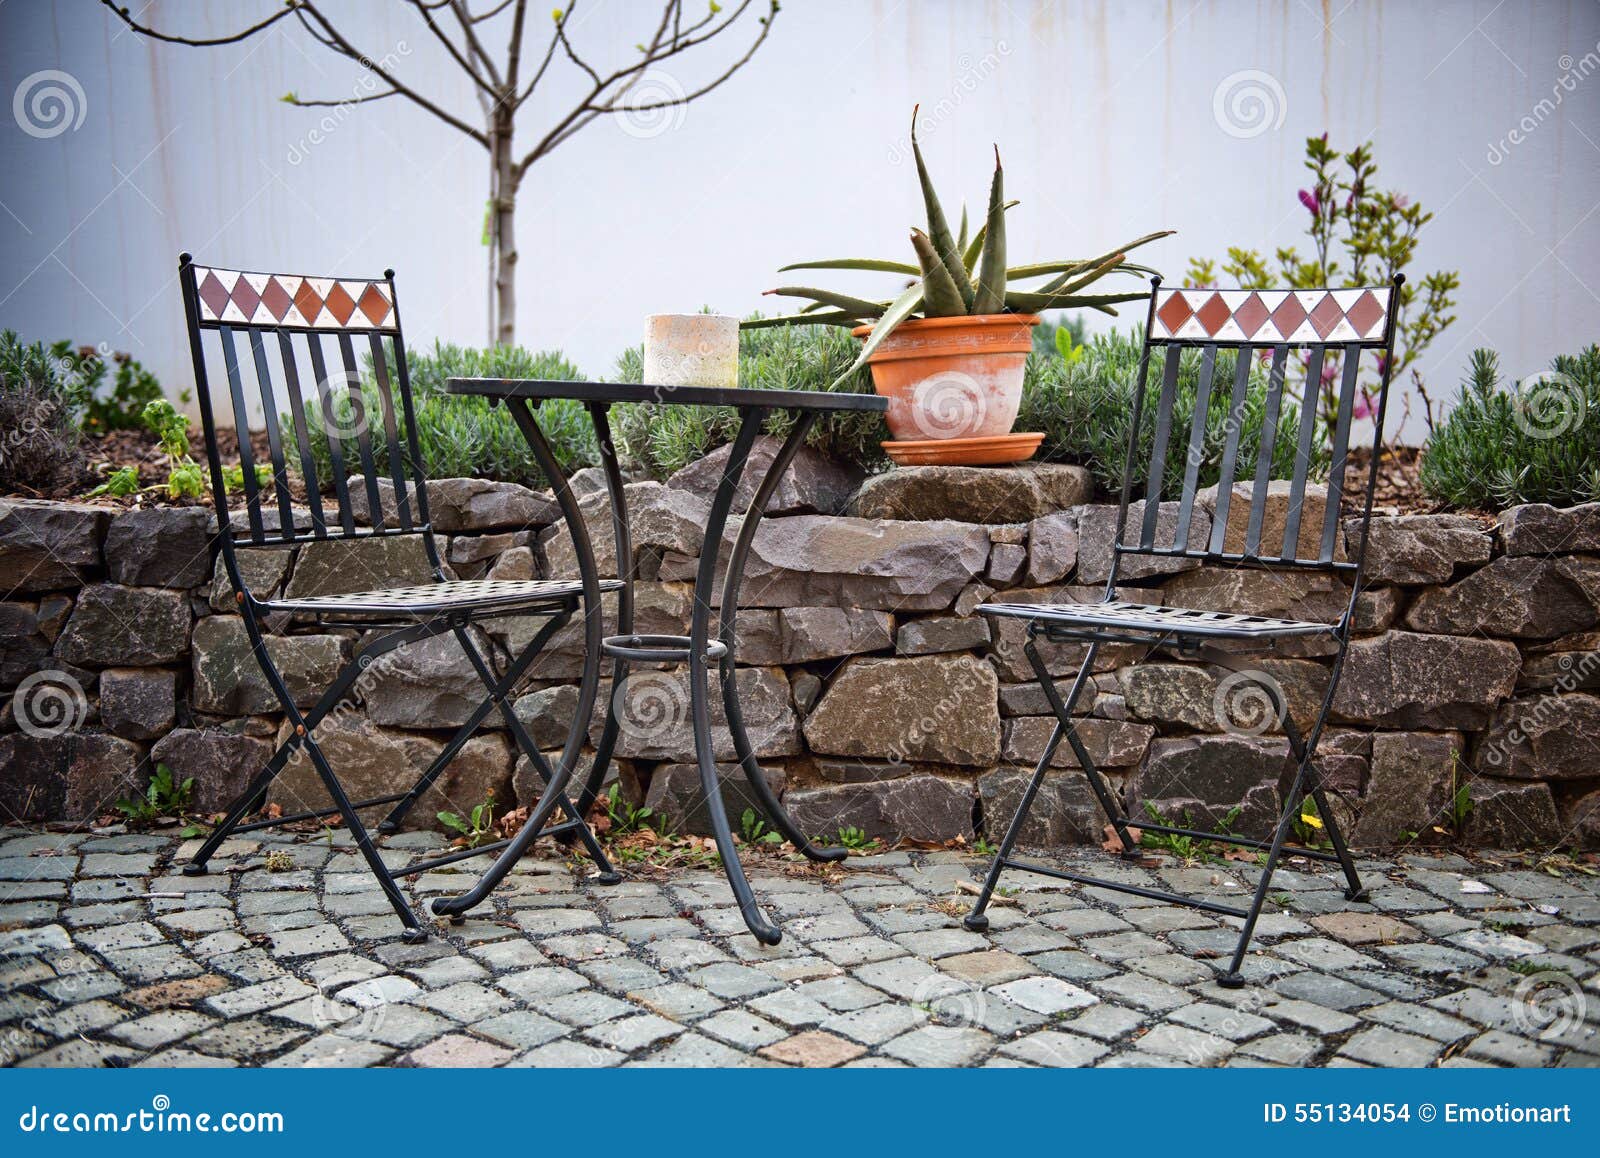 Cast Iron Garden Furniture On A Patio Stock Photo Image Of